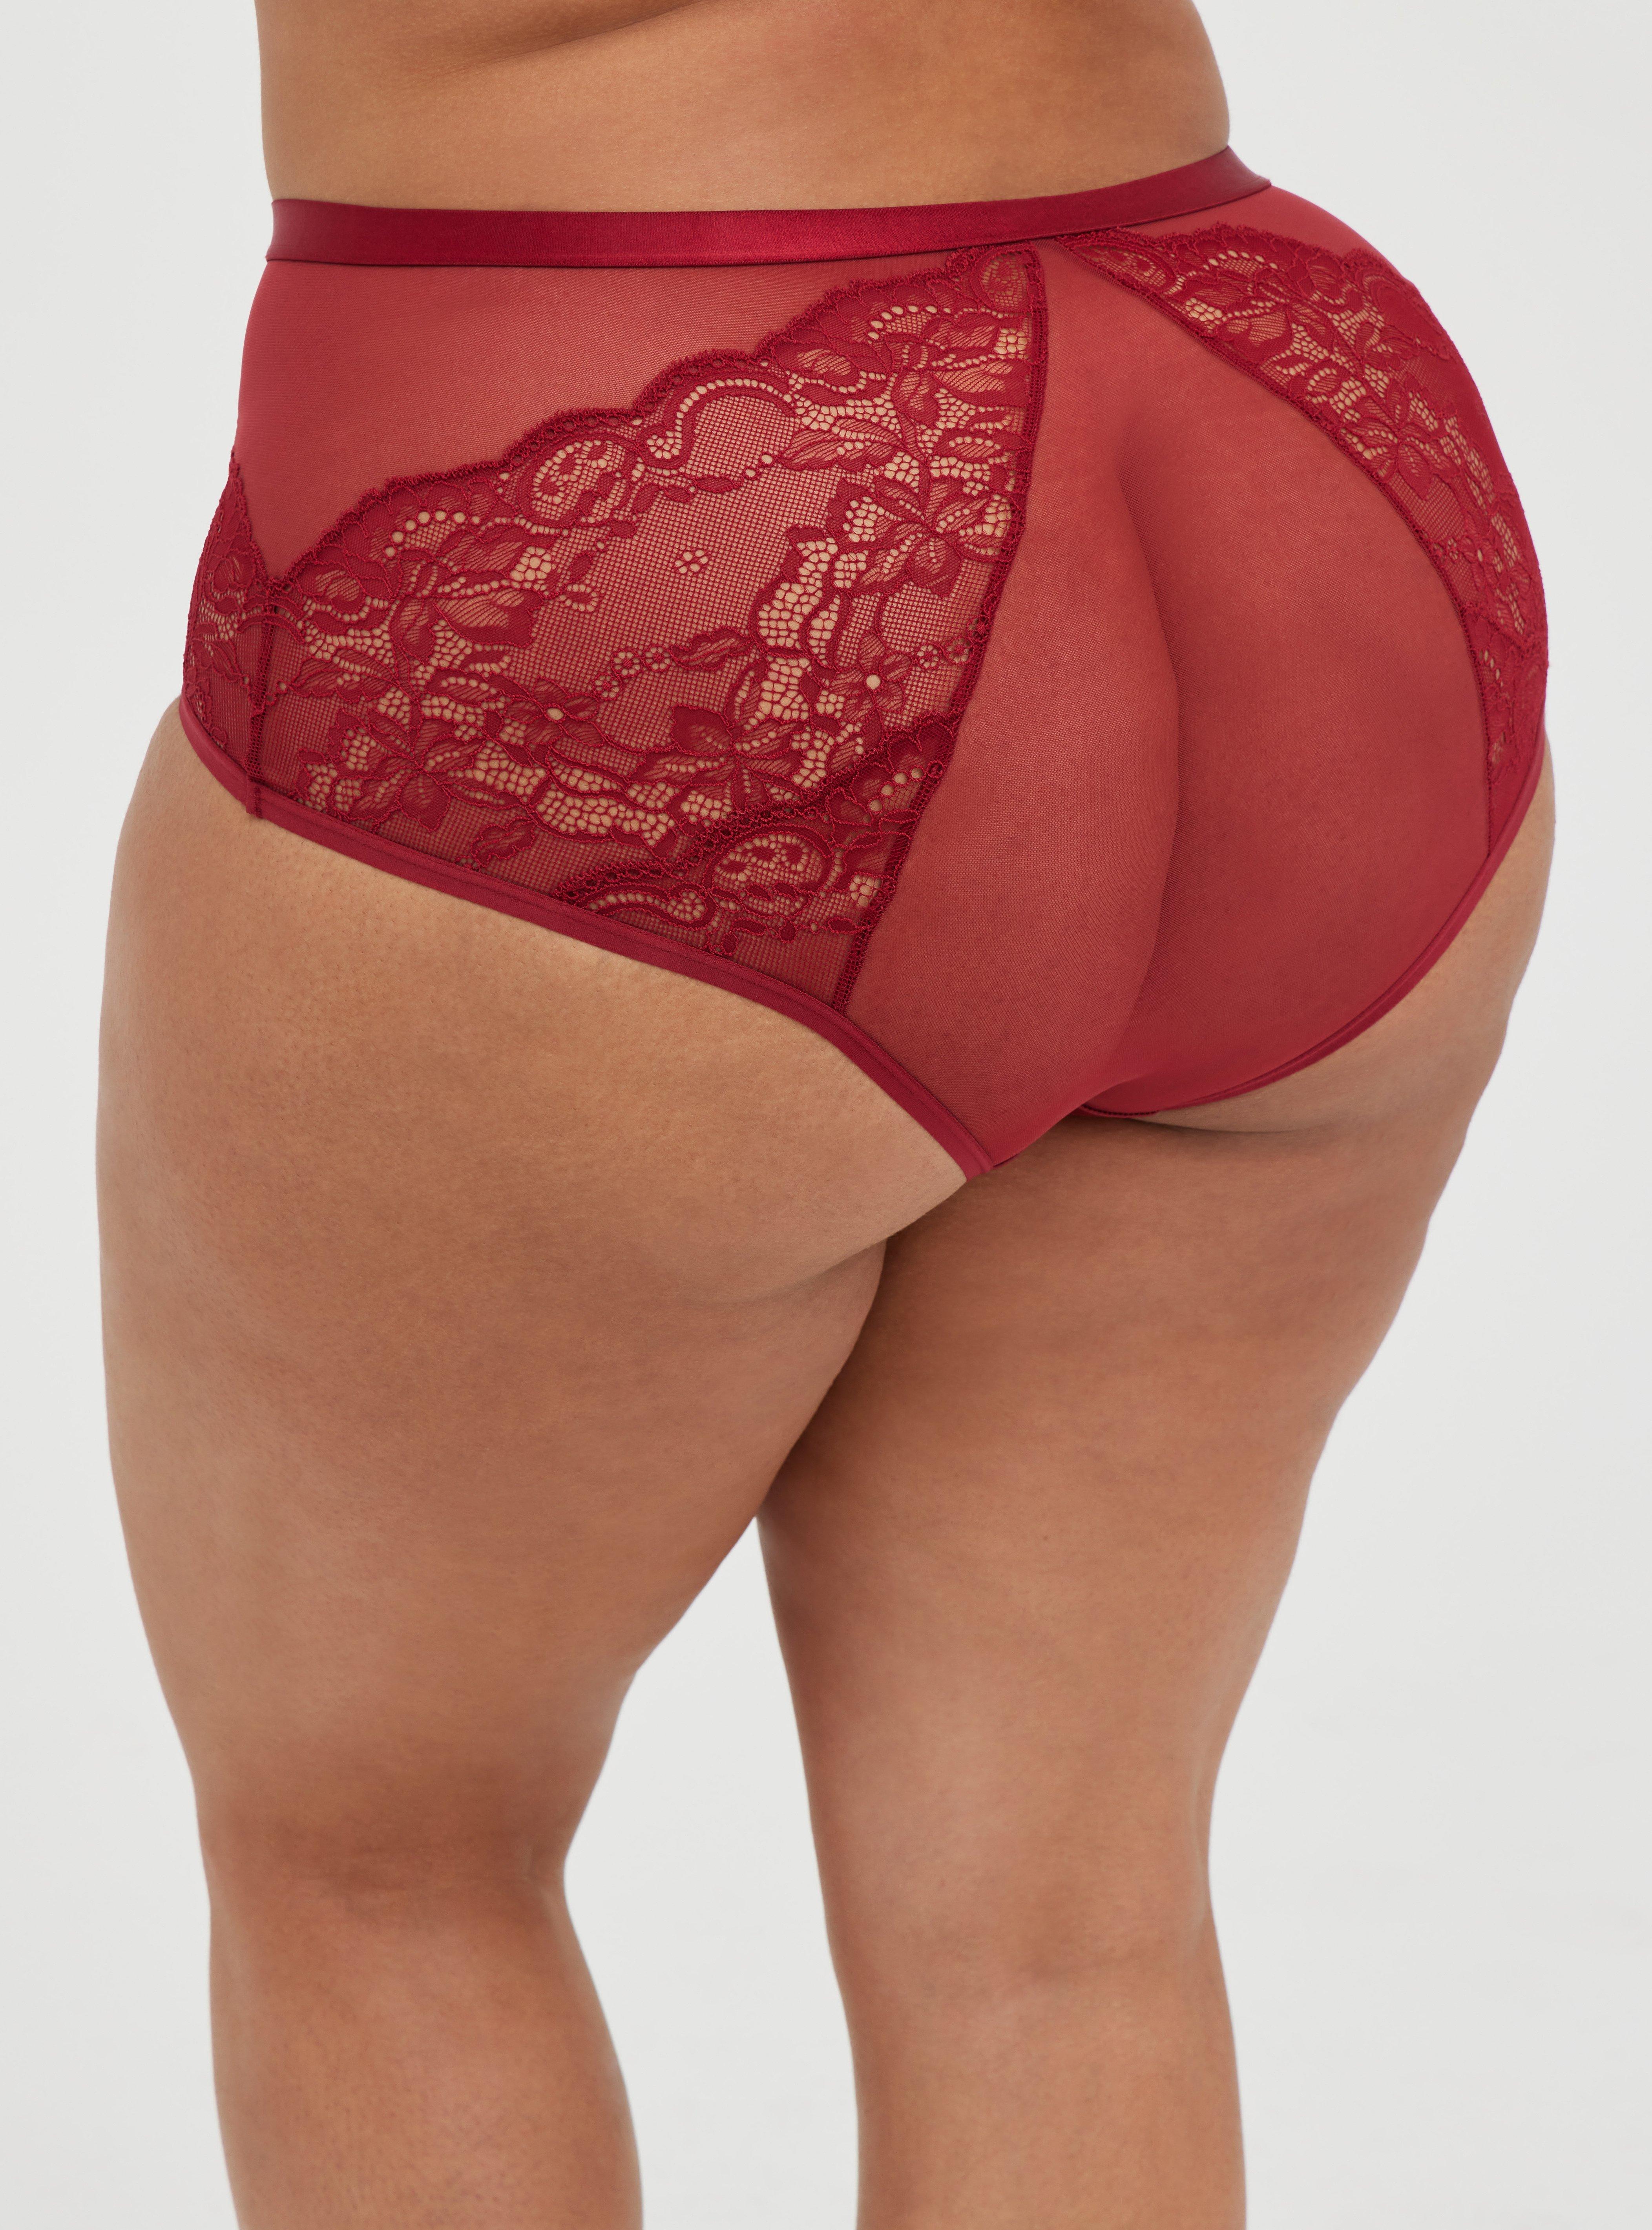 Music Legs Plus size cheeky lace panty with satin bow 10015q-hpink/bk1x/2x